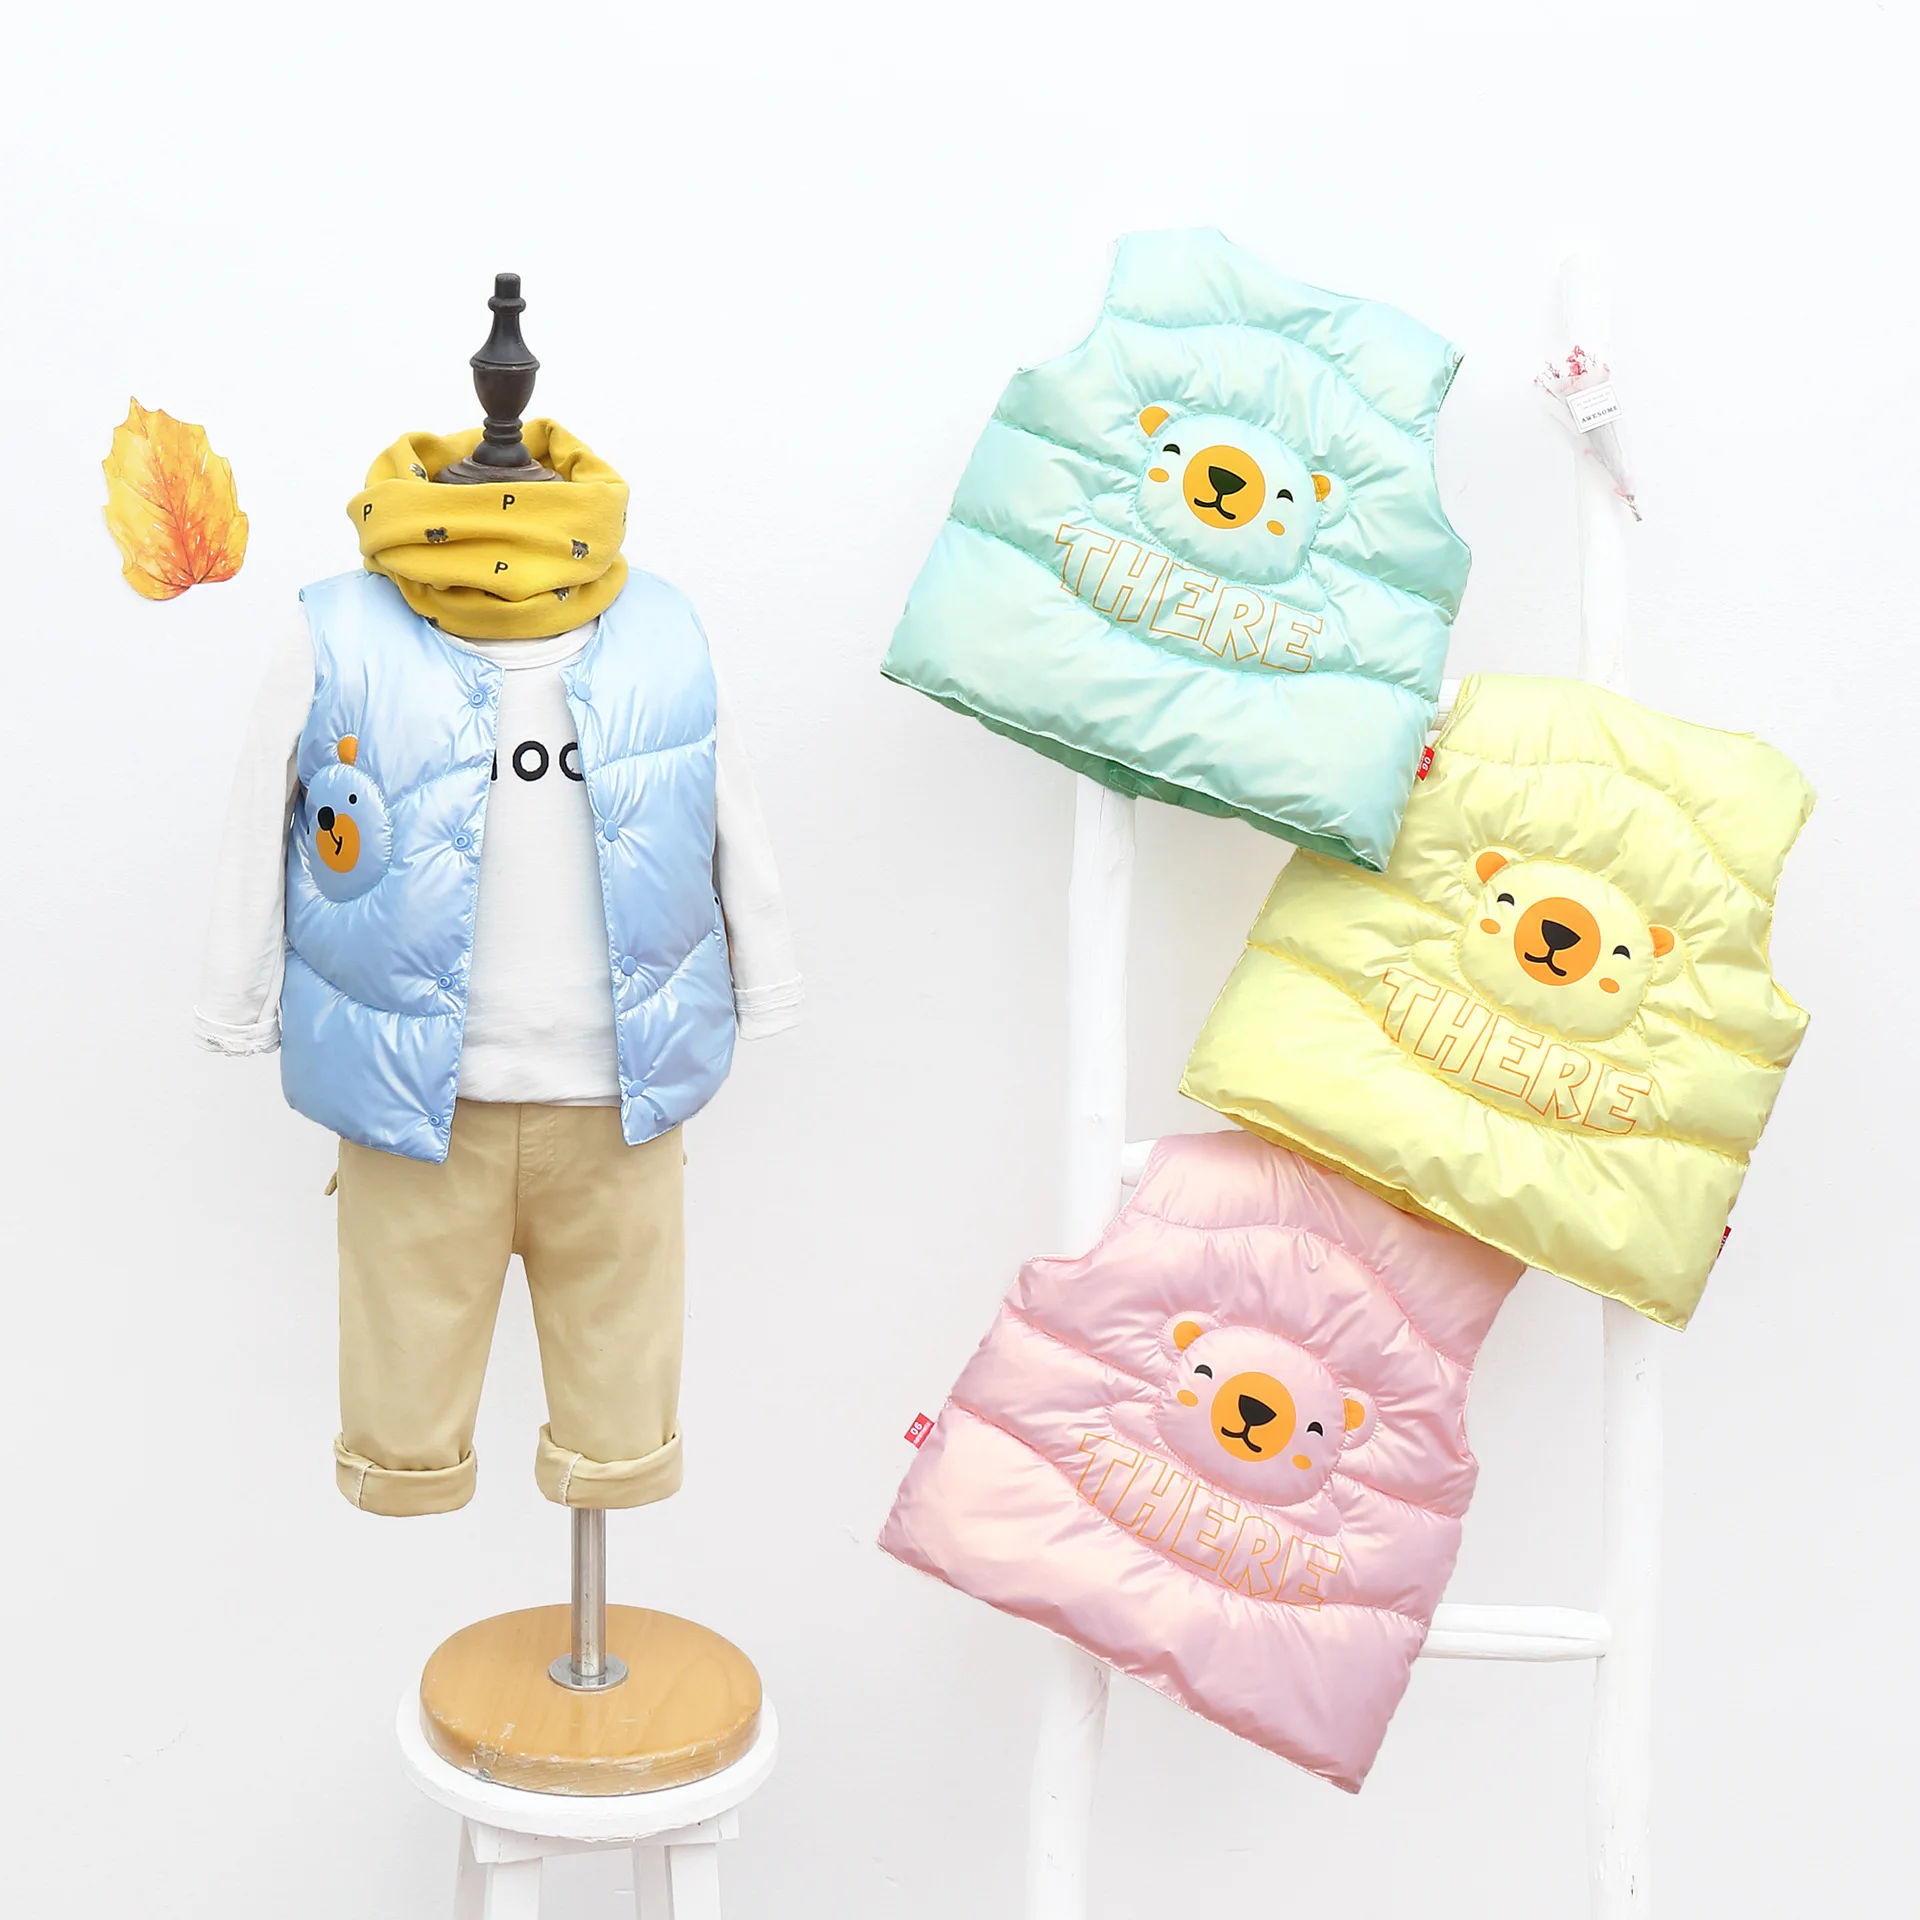 Fall Winter Keep Warm For Boy Clothing Baby Girl Cardigan Jackets Kids Children Top Cute Coat Multiple Styles And Color 2021 New